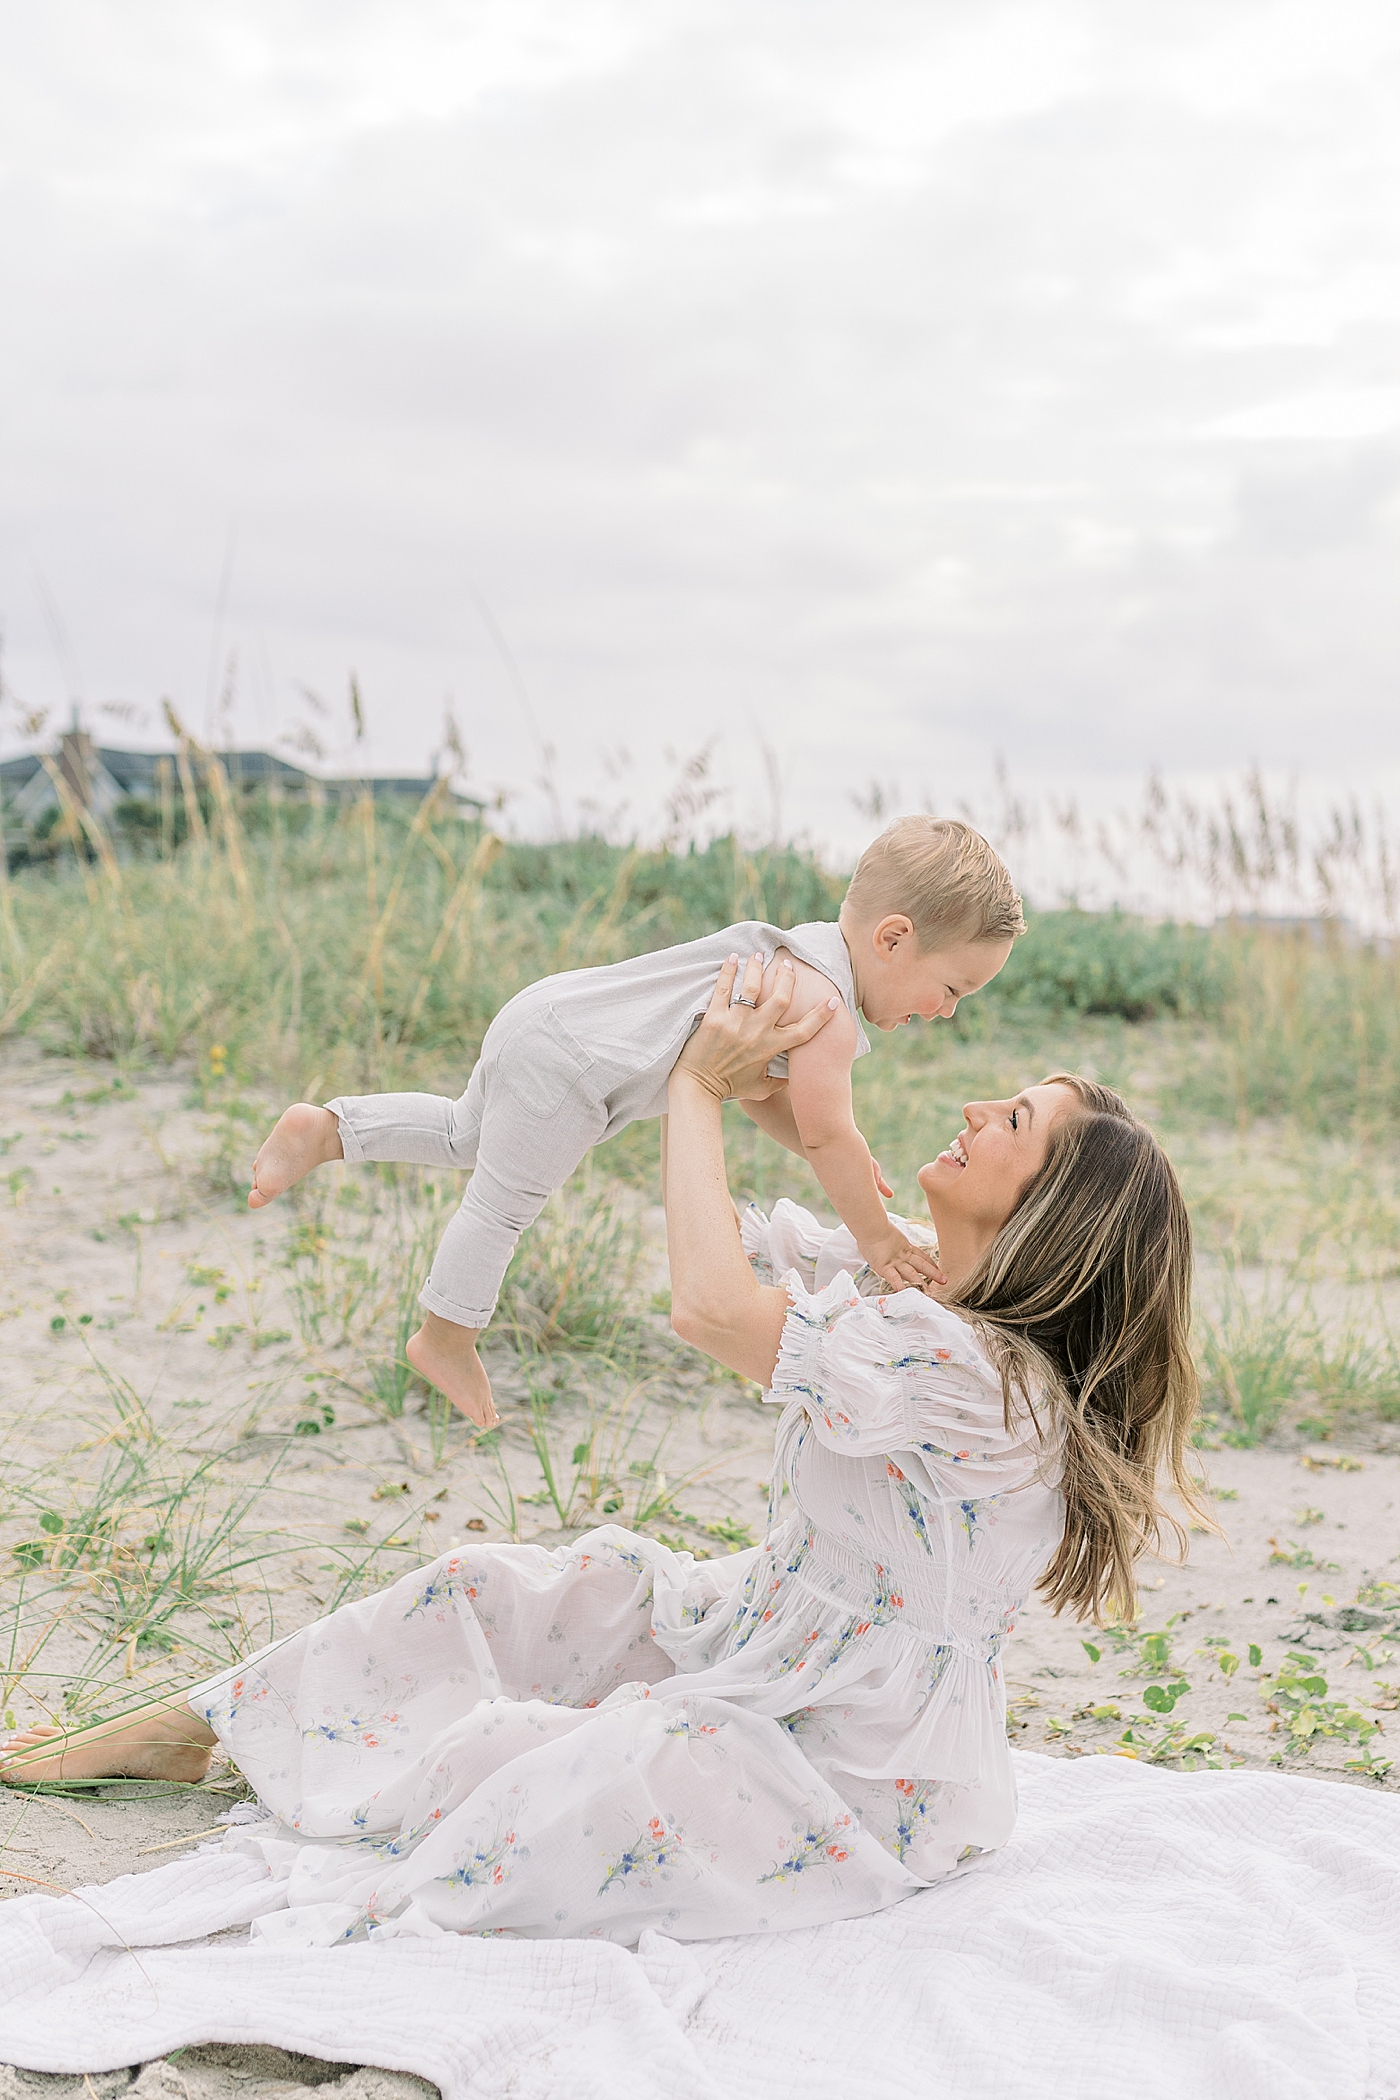 Mom playing with her baby boy on the beach | Image by Caitlyn Motycka